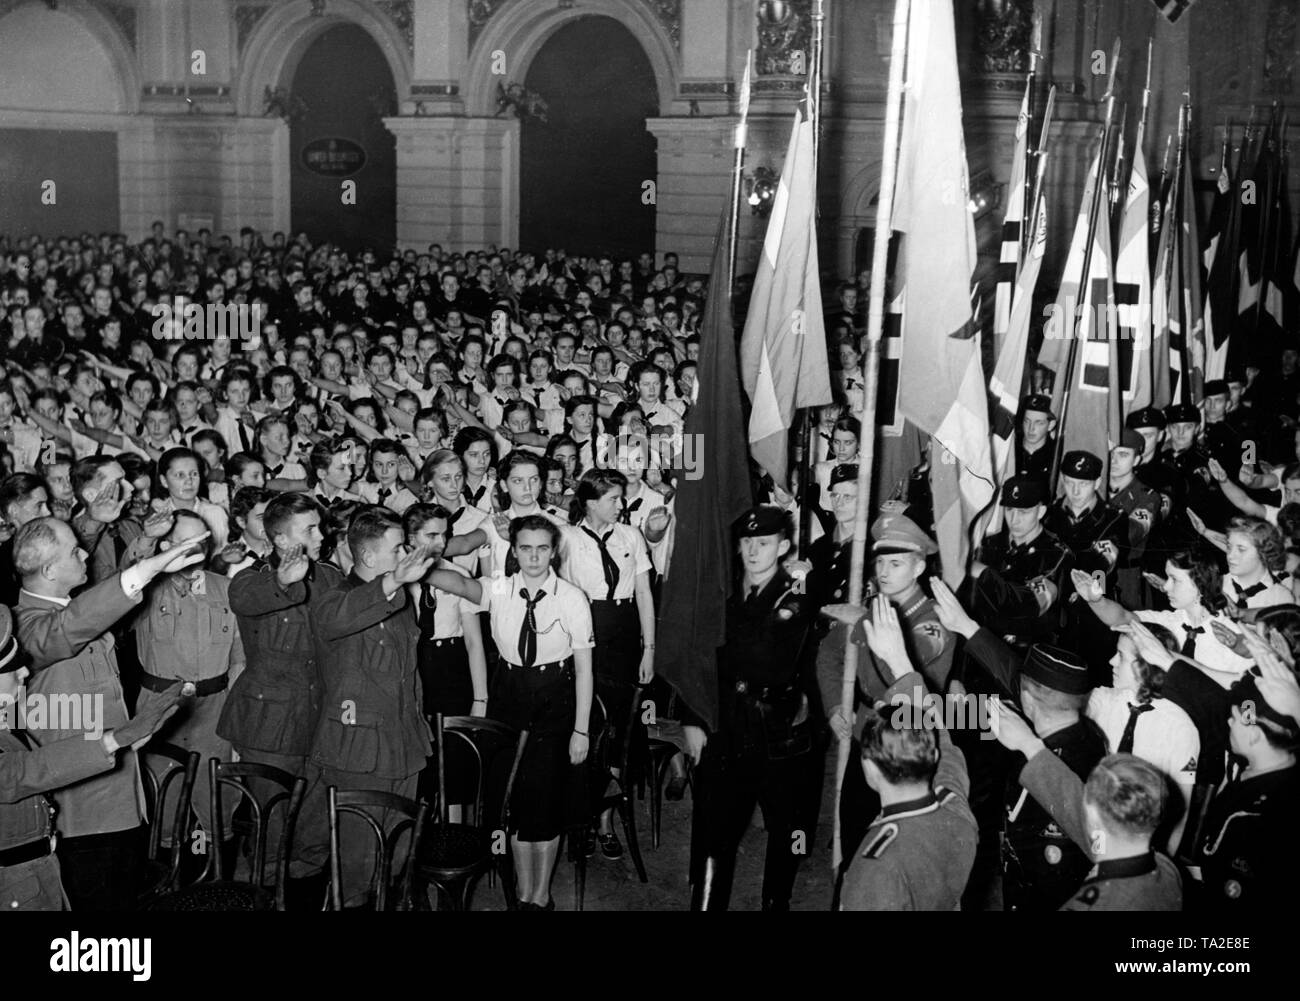 For propagandistic influence 'educational events' were ordered for the youth -here in Friedrichshain, where Gauleiter Goerlitzer gives a speech.  Here, members of the Wehrmacht, of the Hitler Youth and of the BDM. On the far left, Gauleiter Goerlitzer performs  the Hitler salute. Stock Photo